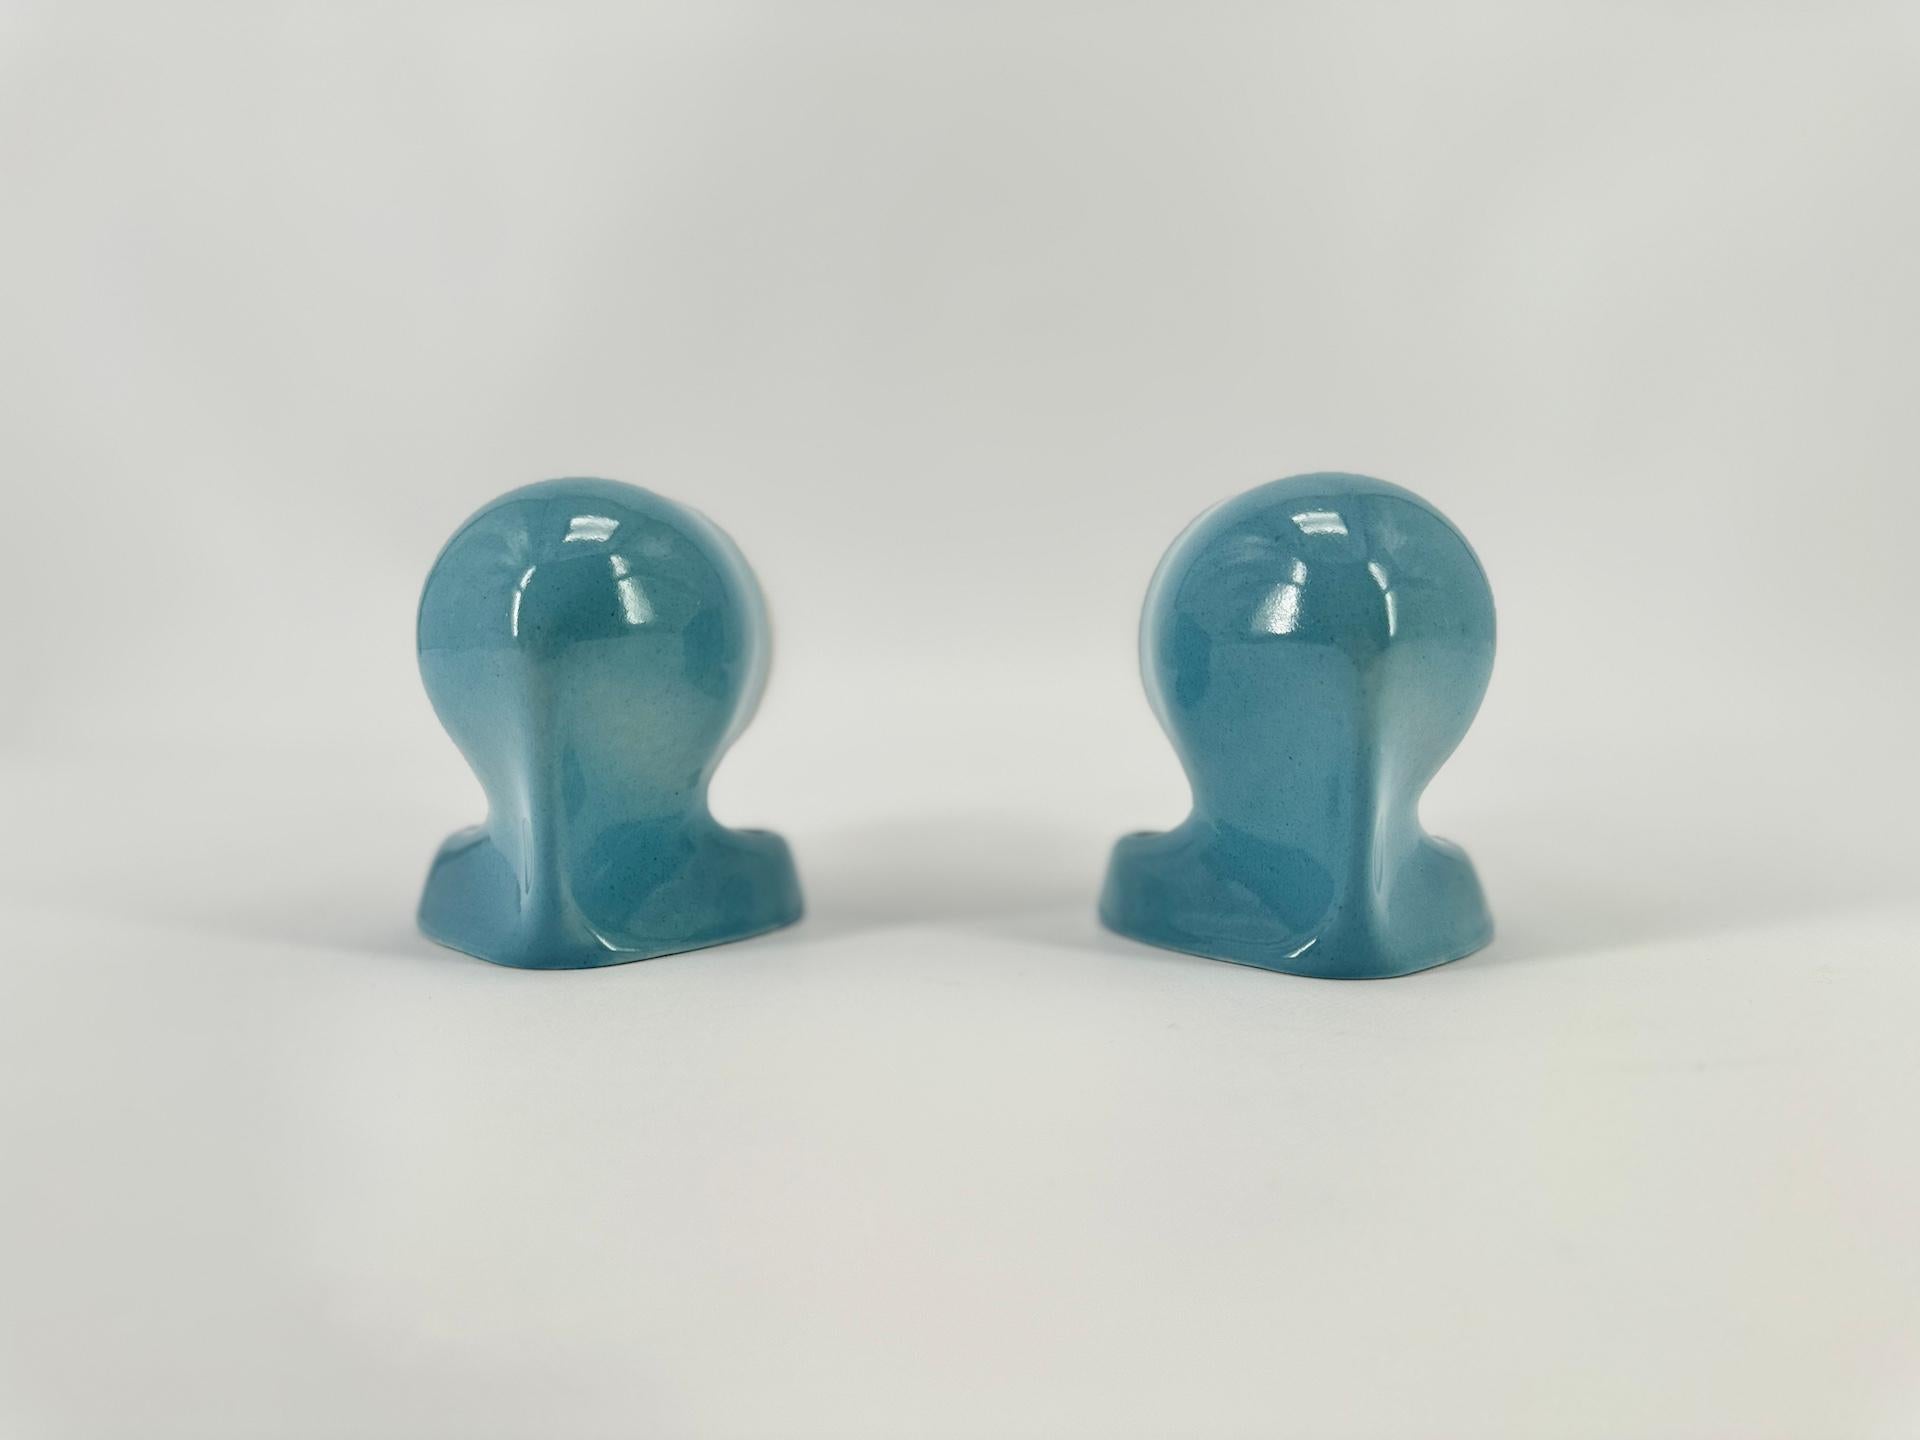 Mid-20th Century Pair of  1950's Blue Porcelain Wall Lamps By Wilhelm Wagenfeld For Lindner For Sale